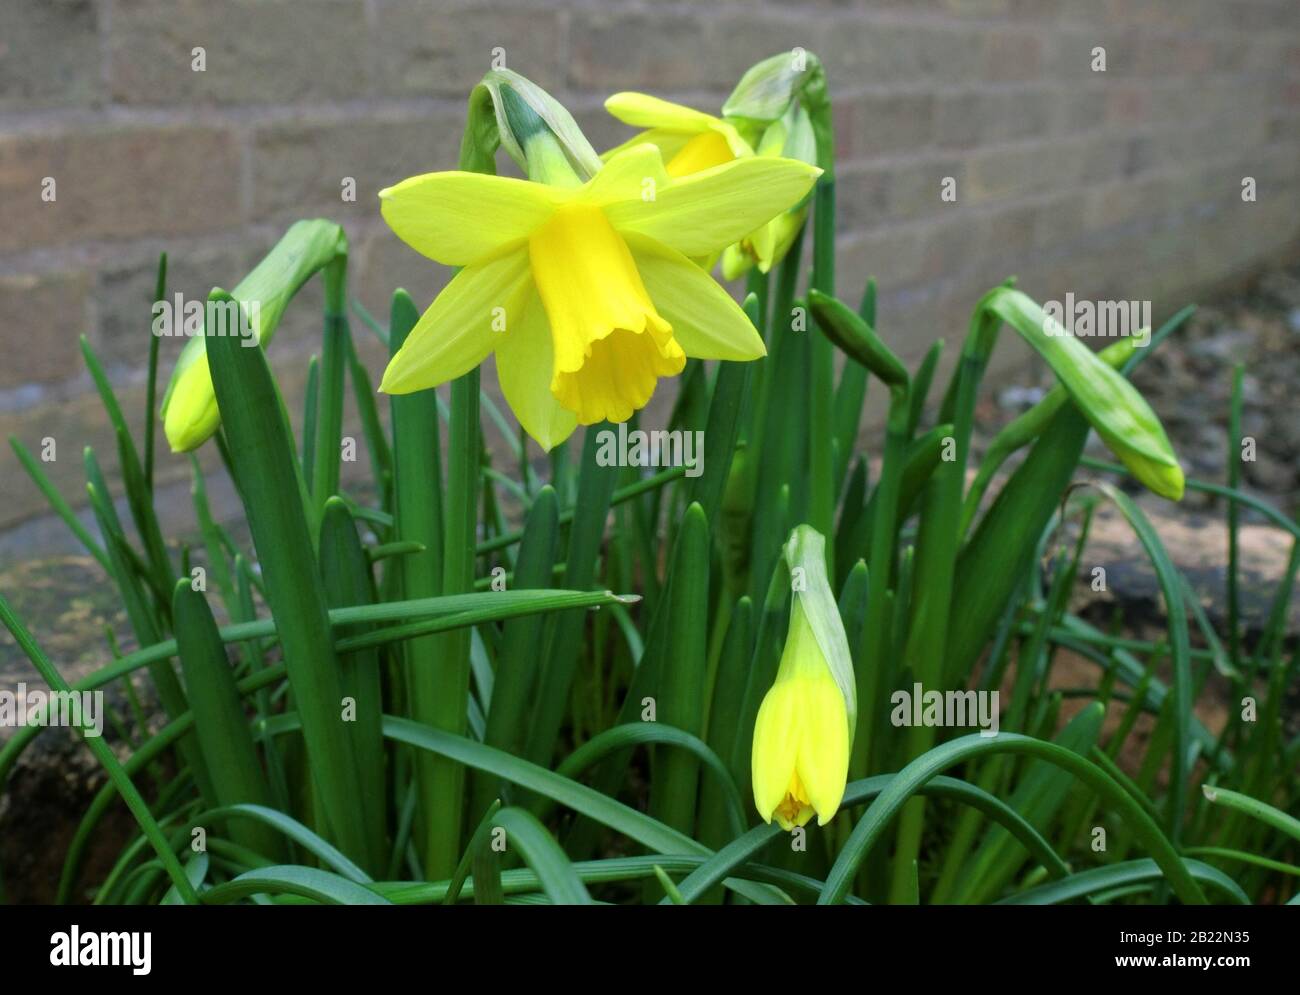 Narcissus Daffodil 'Tete a Tete' Variety in Flower Stock Photo